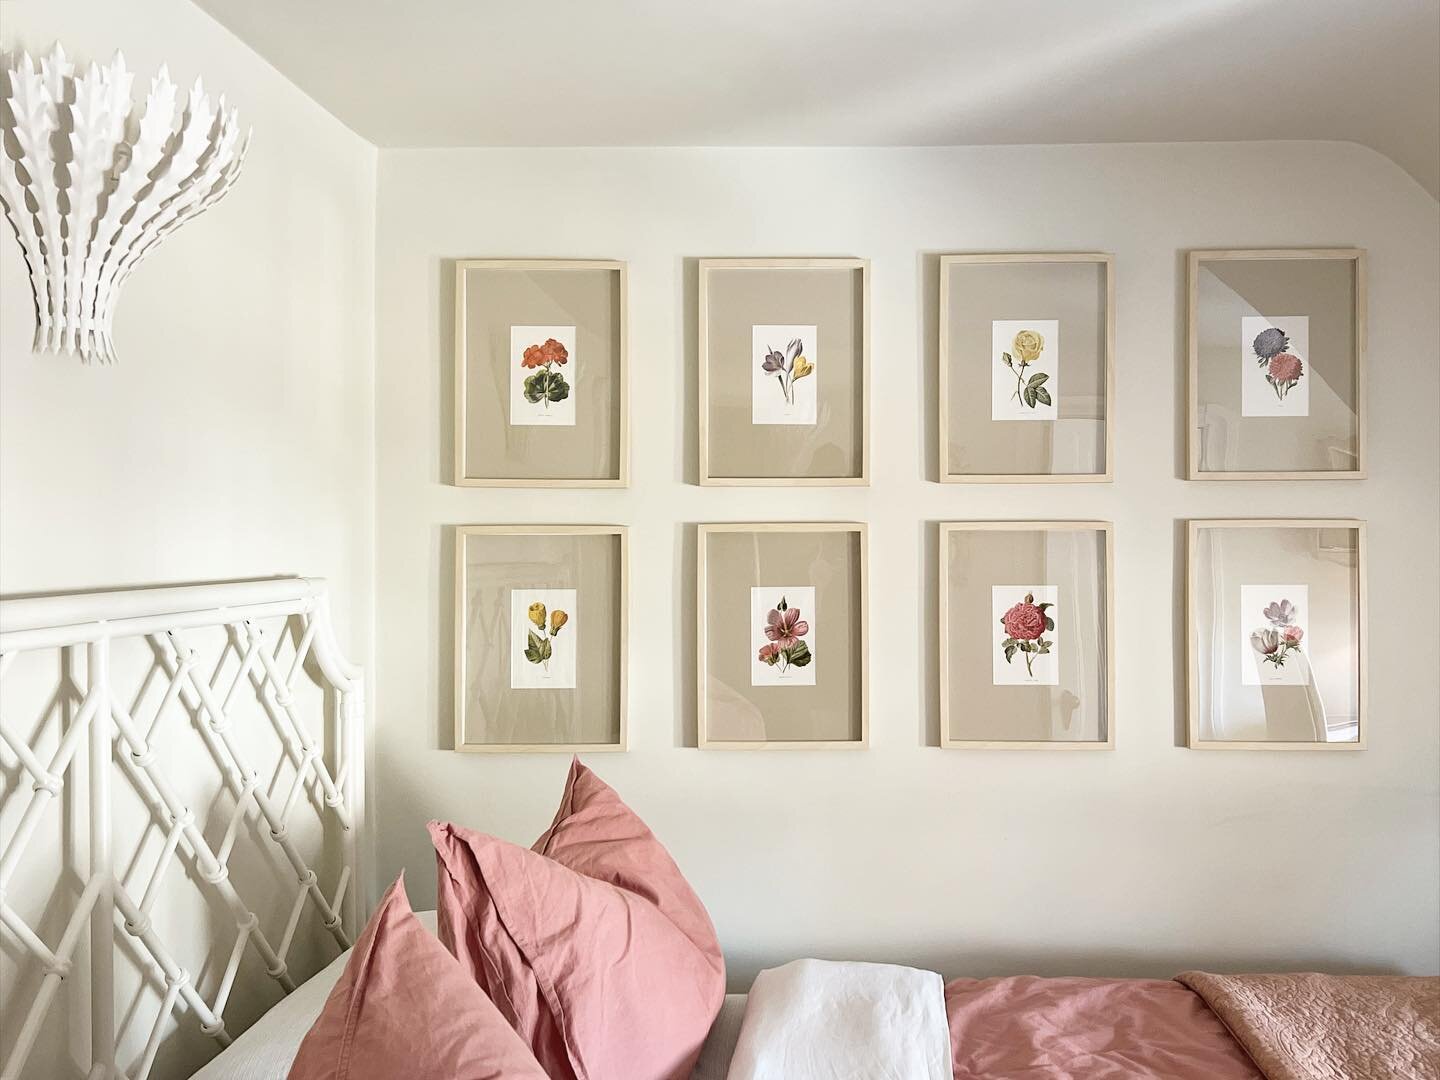 Vintage botanical prints all the way from England via @etsy are an excellent (inexpensive) way of warming up this wall in our guest bedroom. 🌸 | #etsy #botanical #vintage #vintageprint #botanicalprint #guestbedroom #interiordesign #interiordecor #in